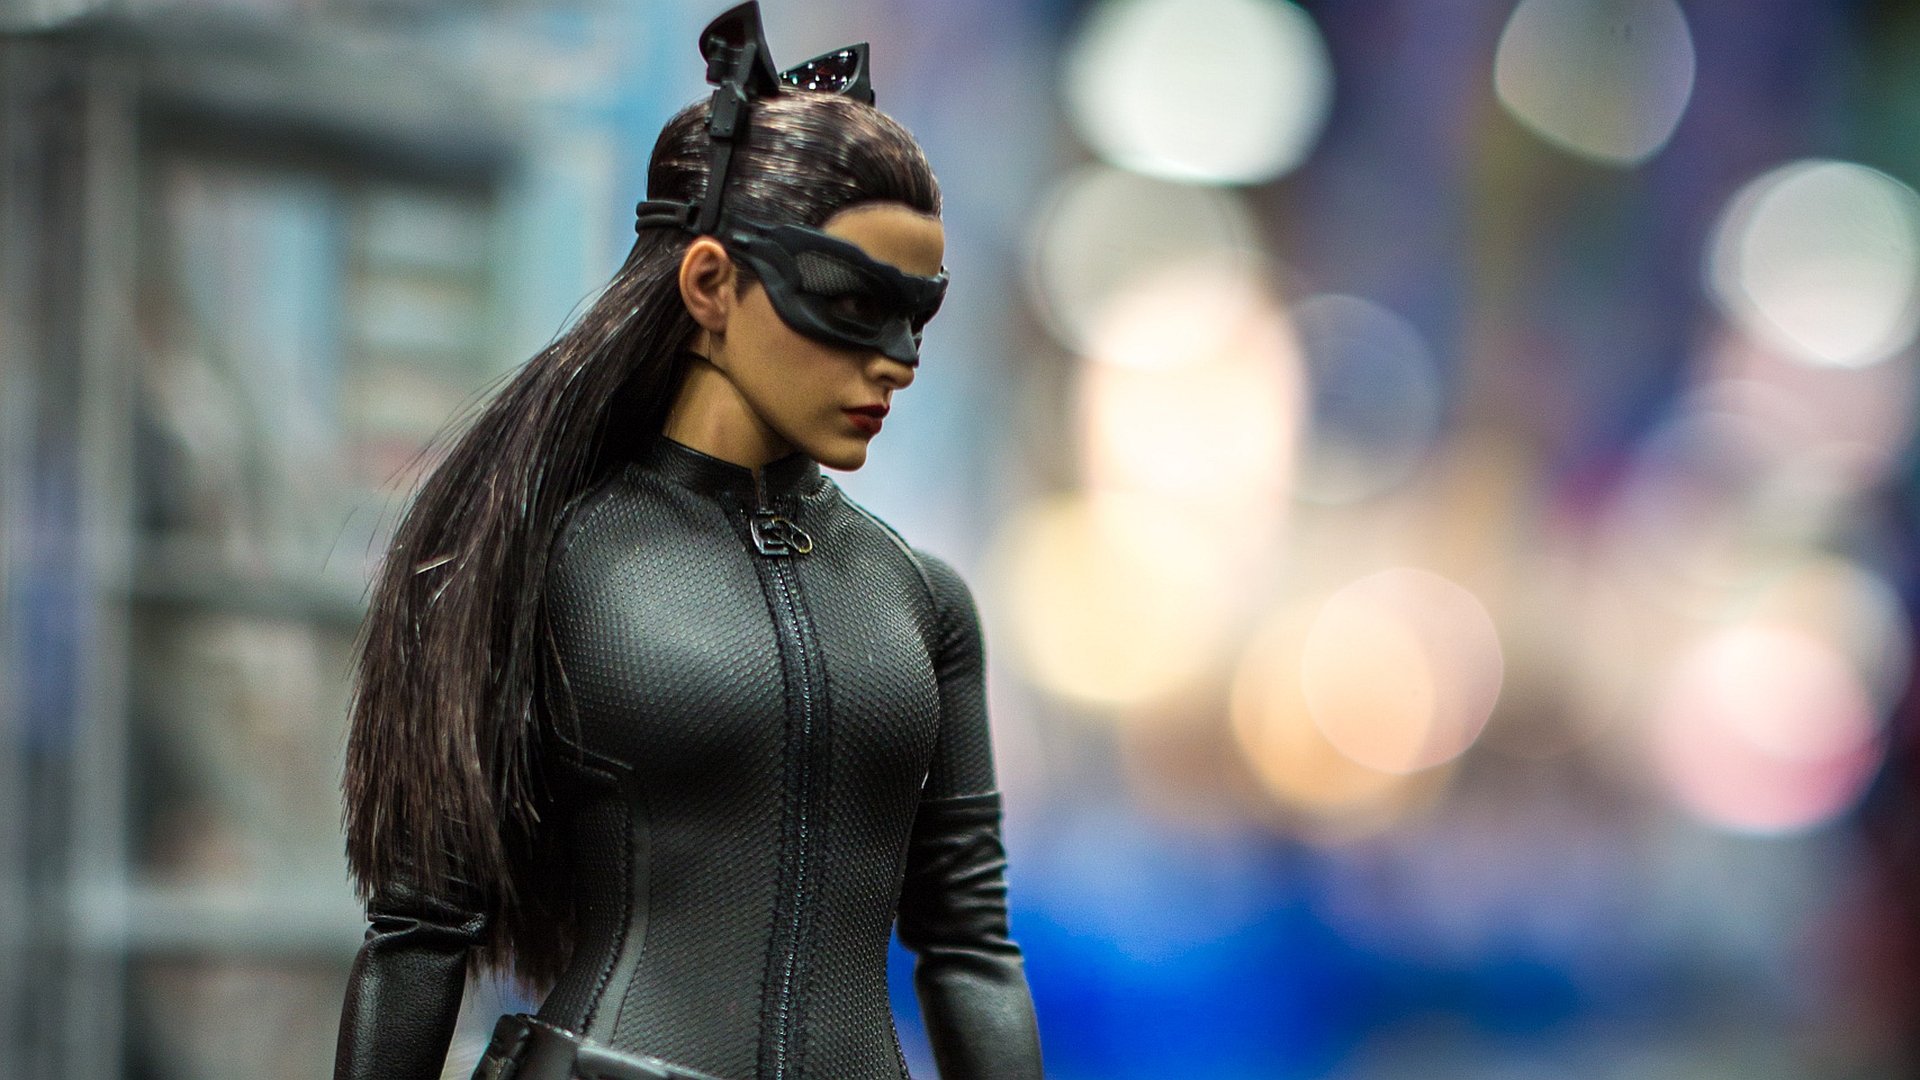 Catwoman 1920x1080